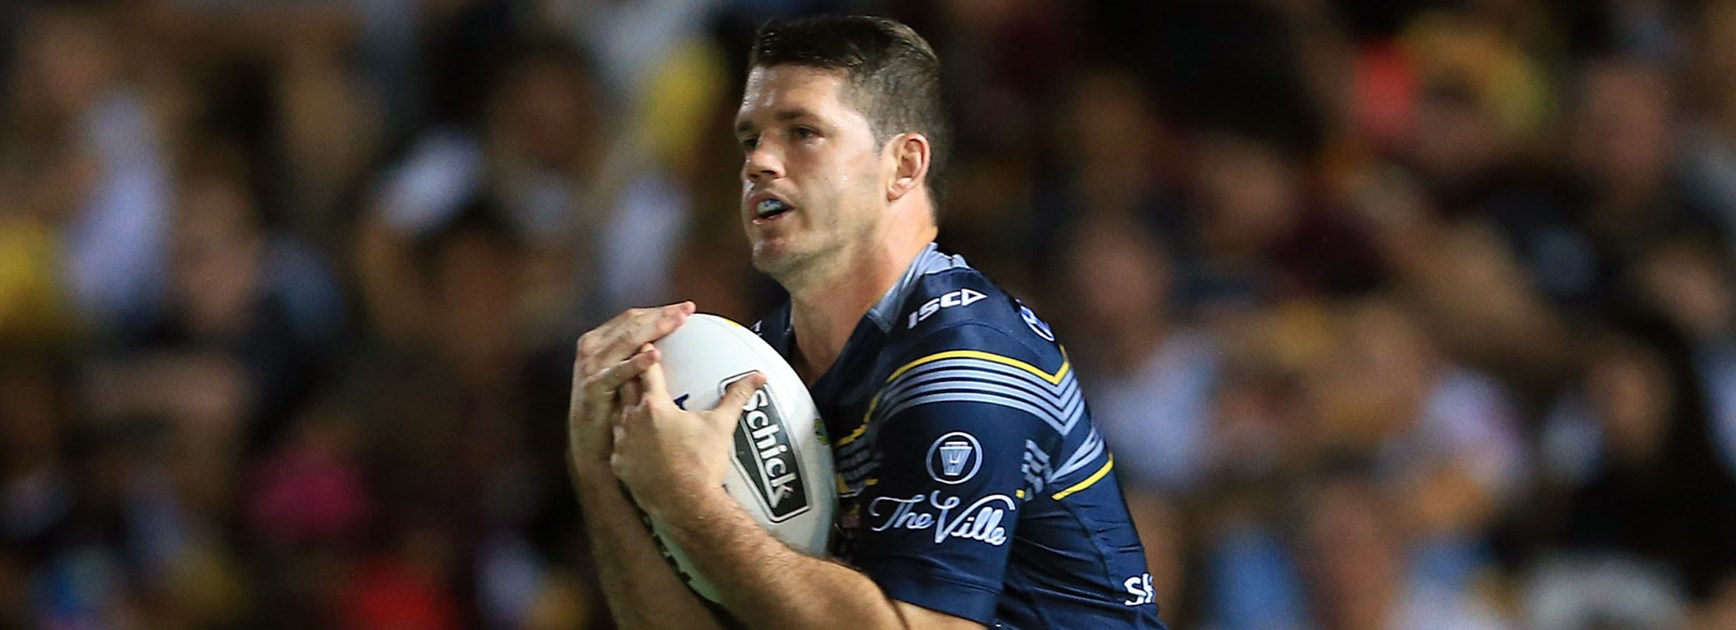 Cowboys fullback Lachlan Coote against the Broncos in Finals Week 2